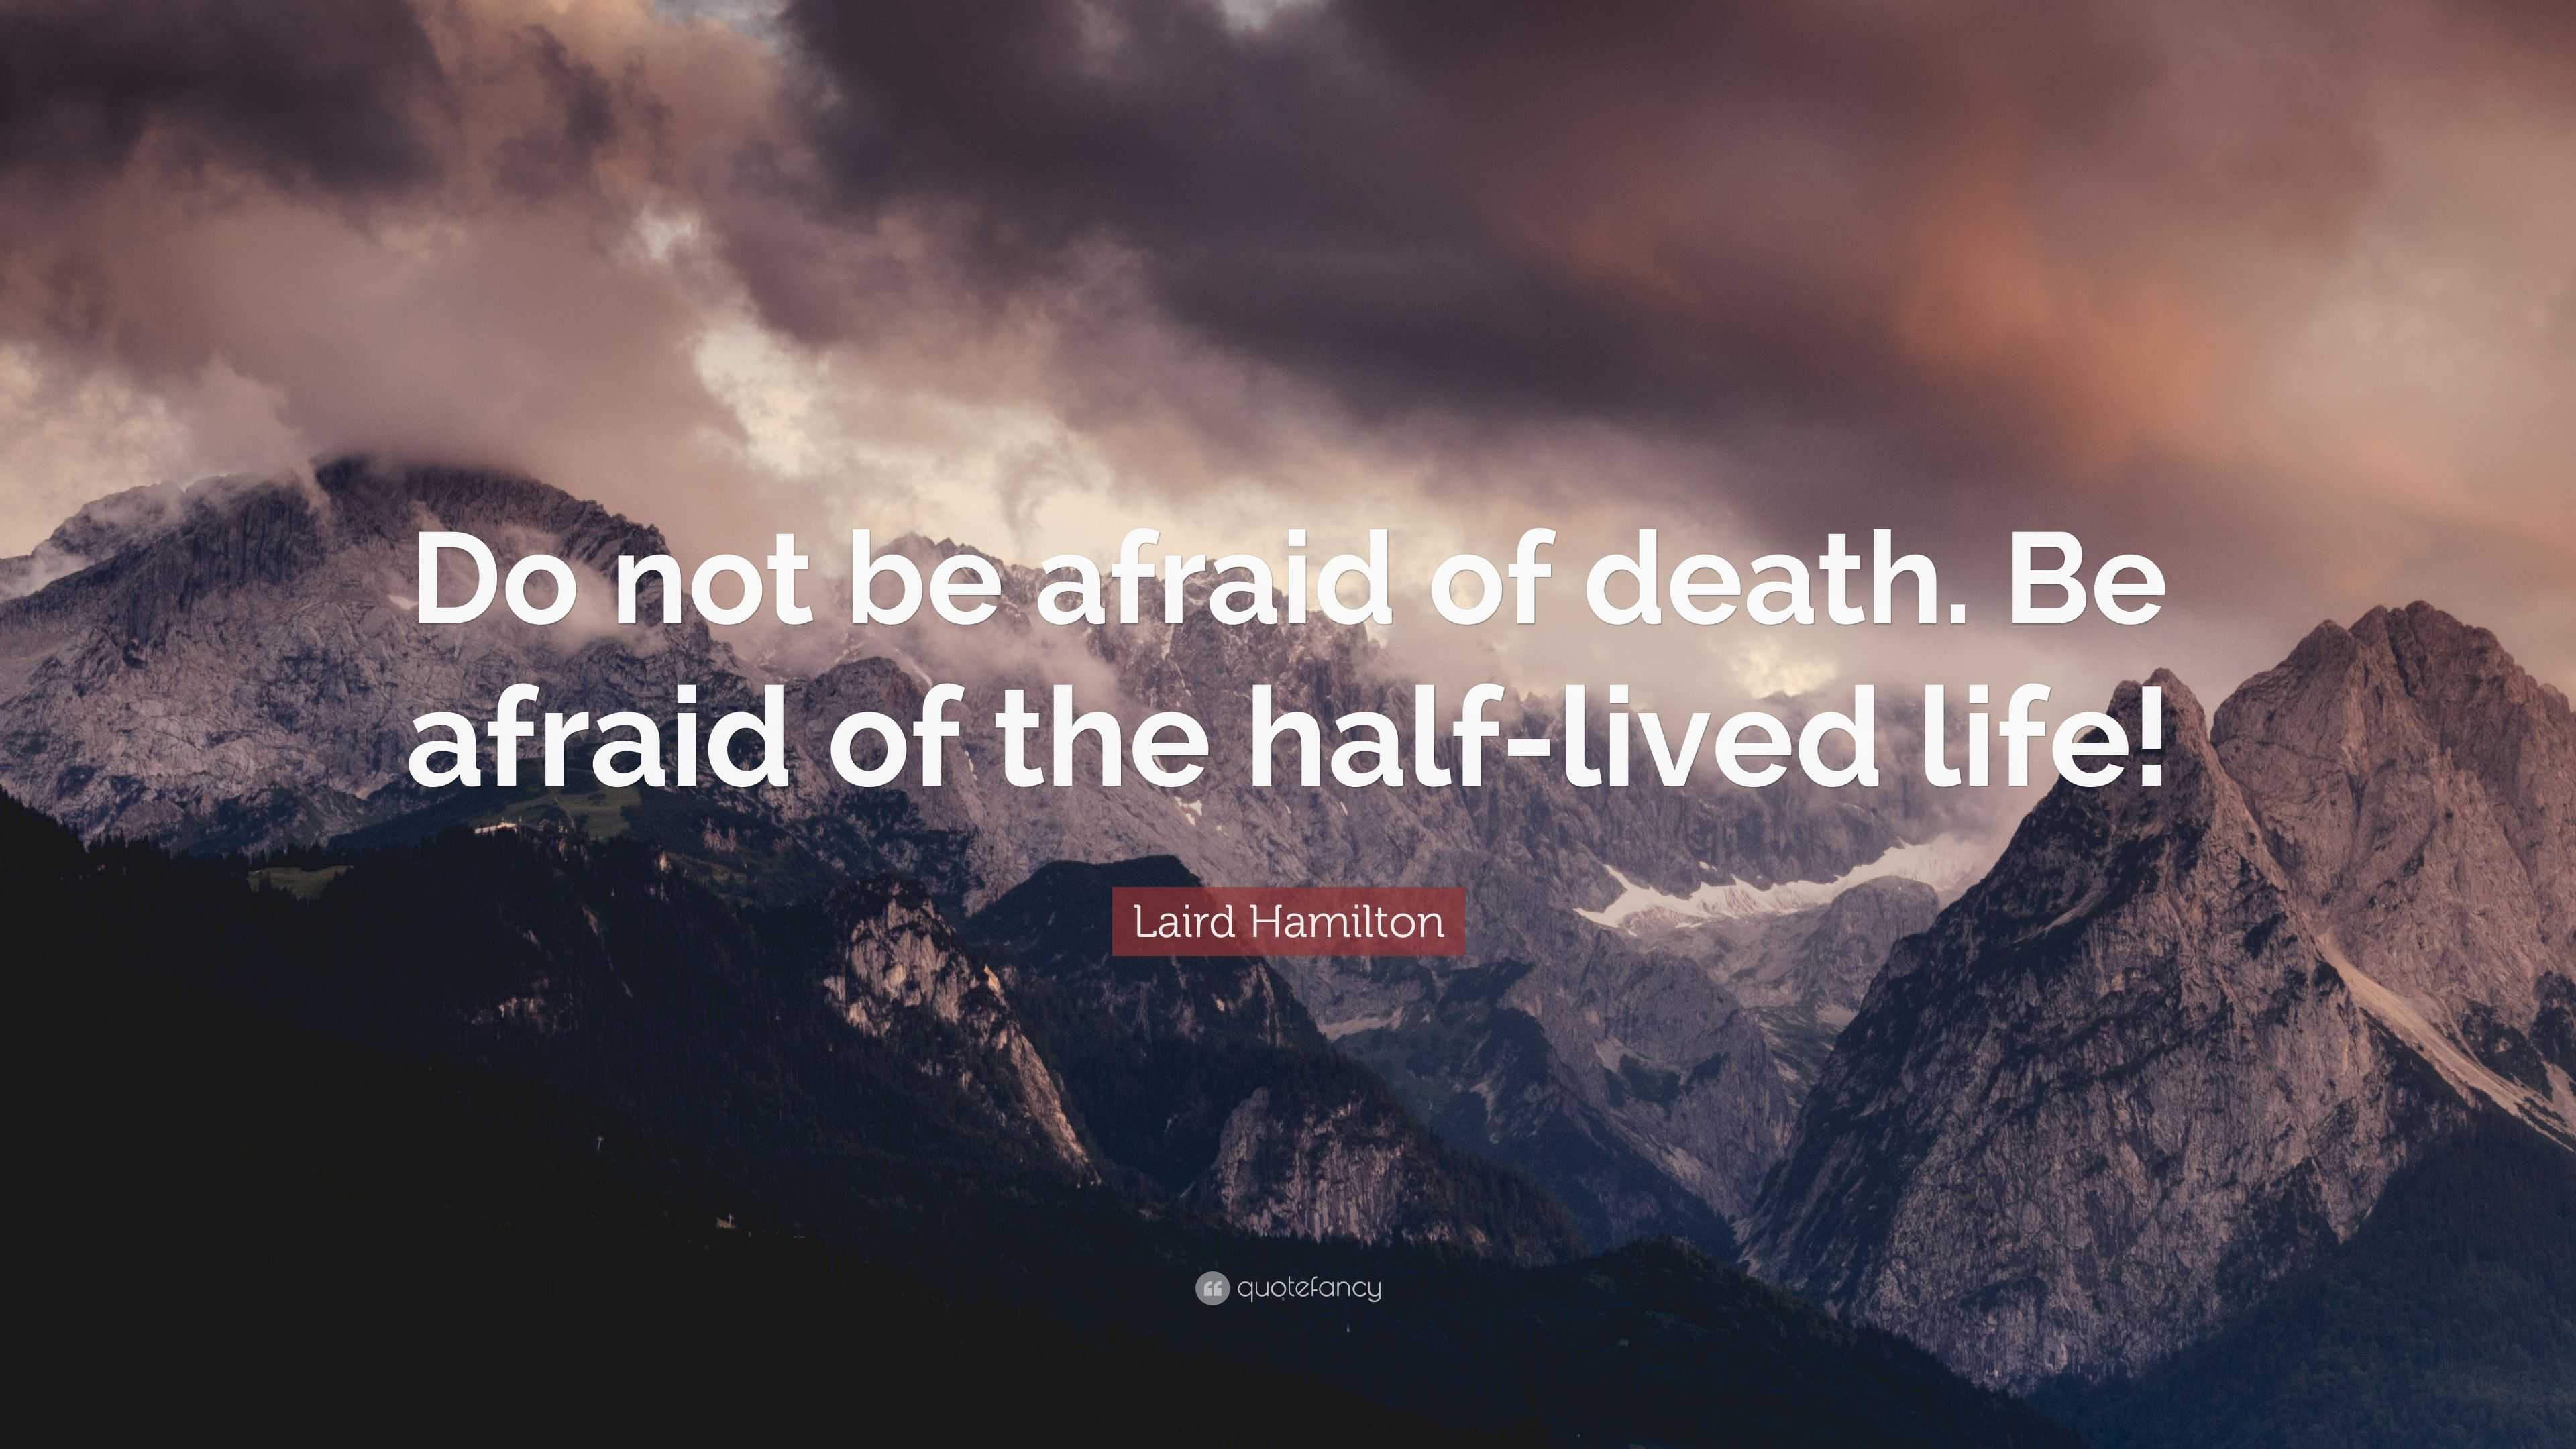 Laird Hamilton Quote “Do not be afraid of Be afraid of the